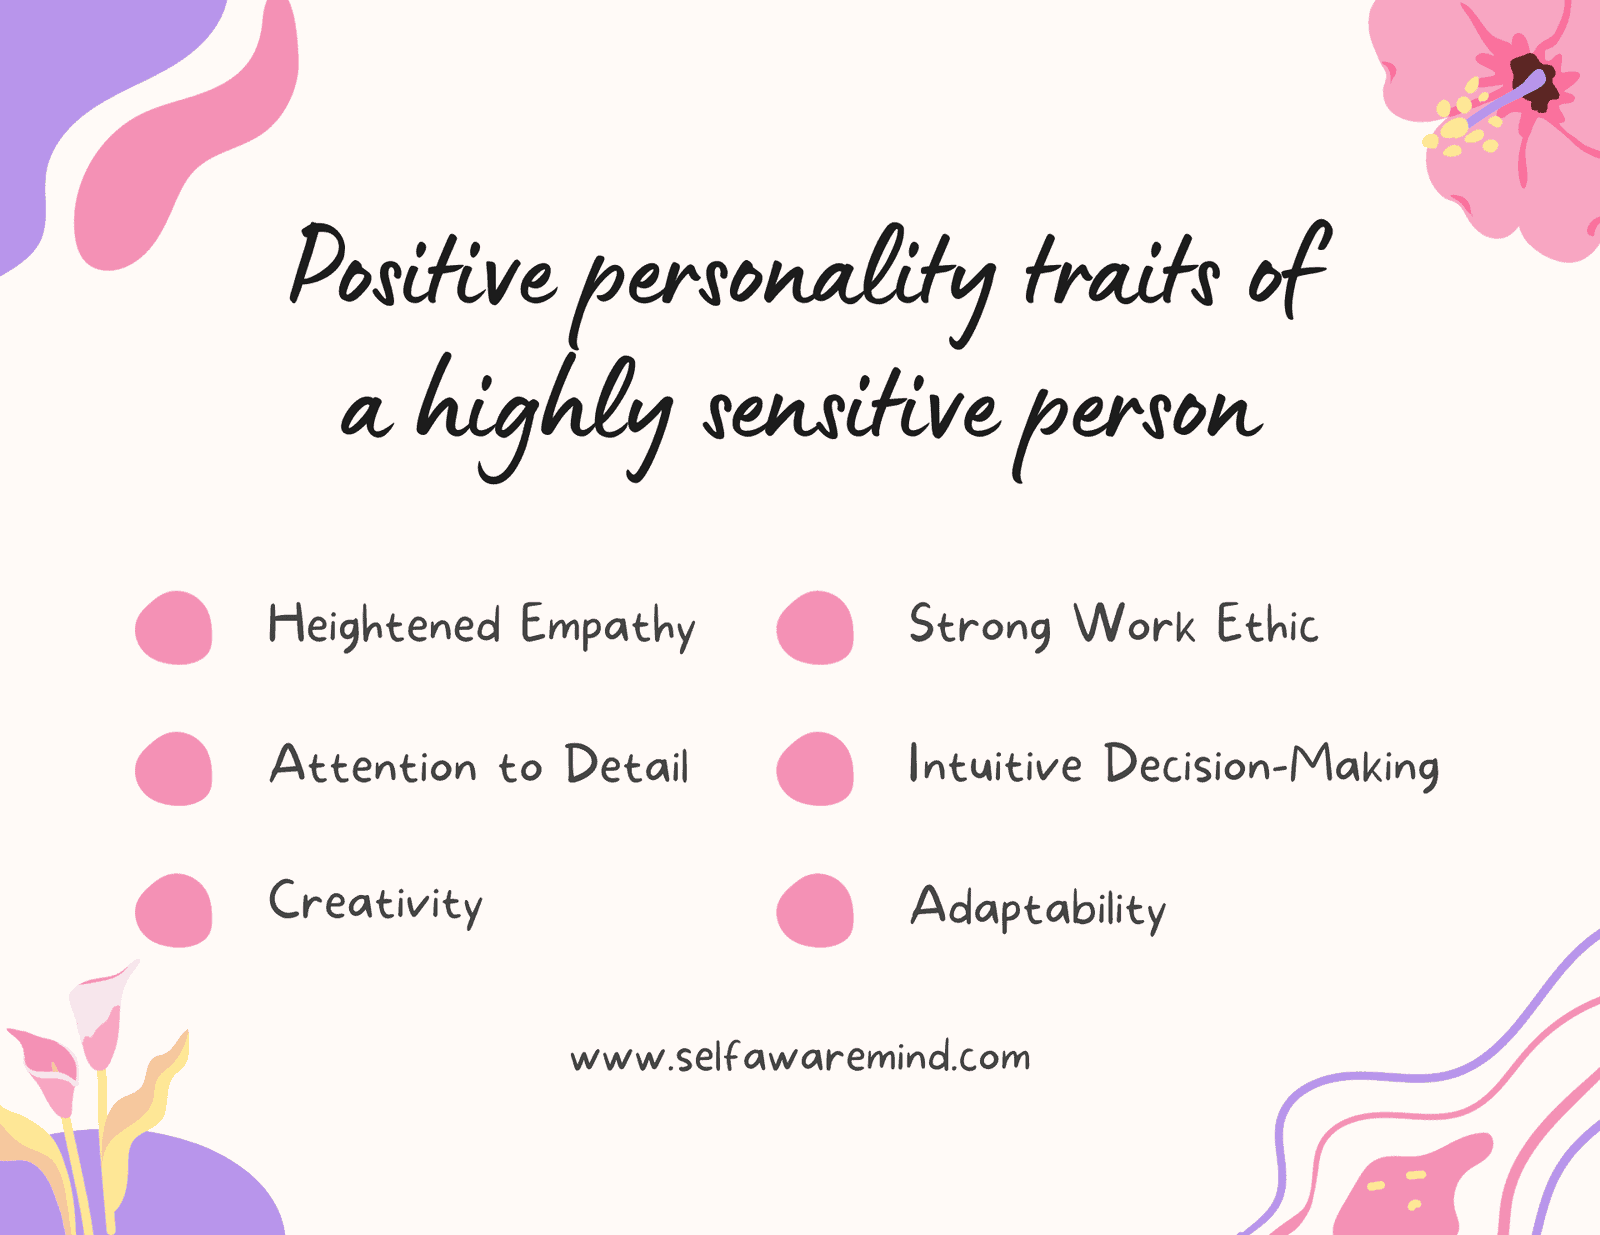 Positive personality traits of a highly sensitive person